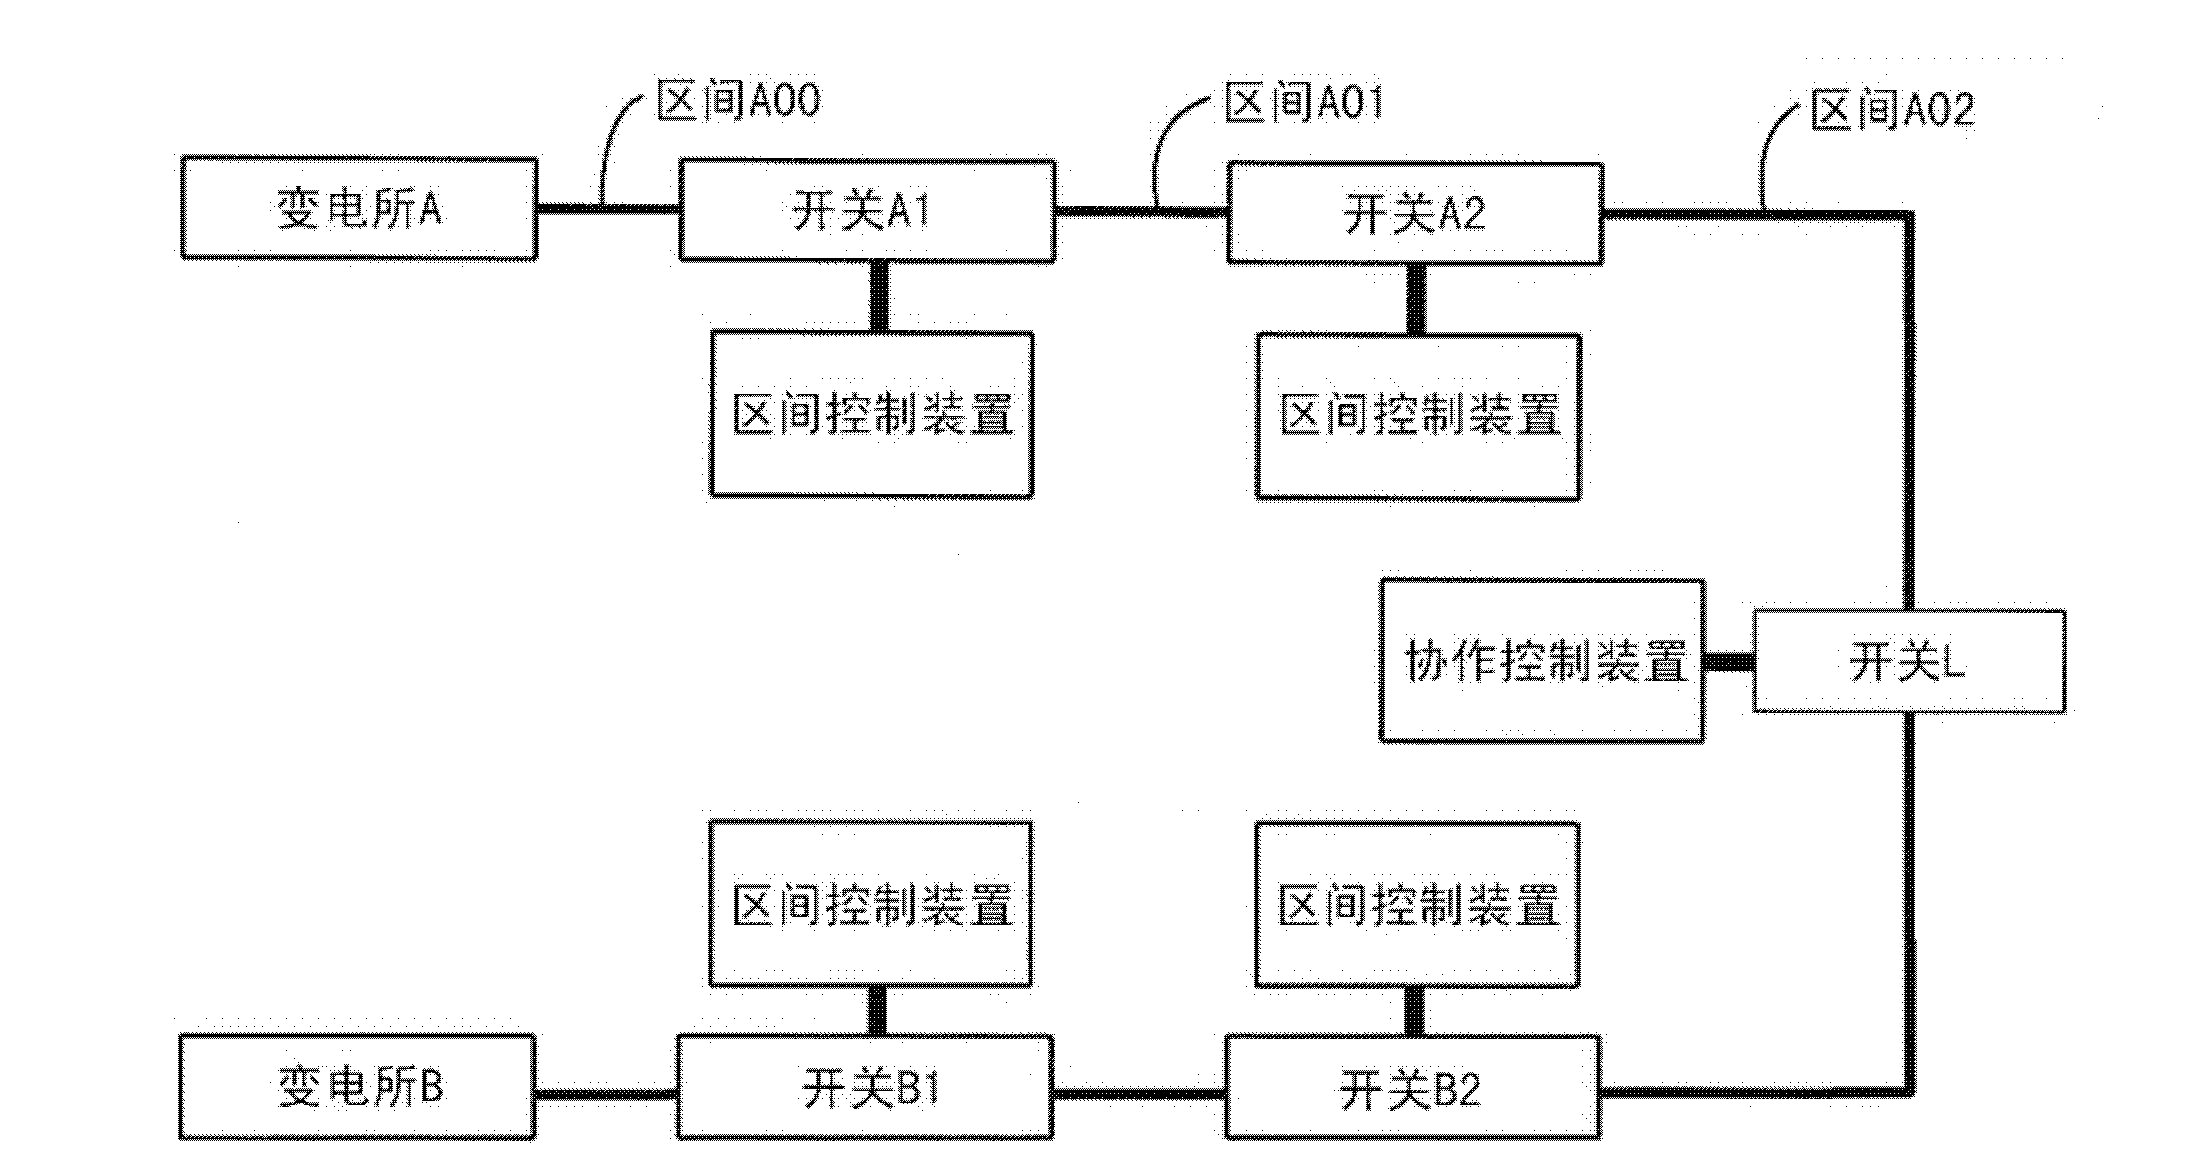 Automatic switching system of high-voltage distribution wires